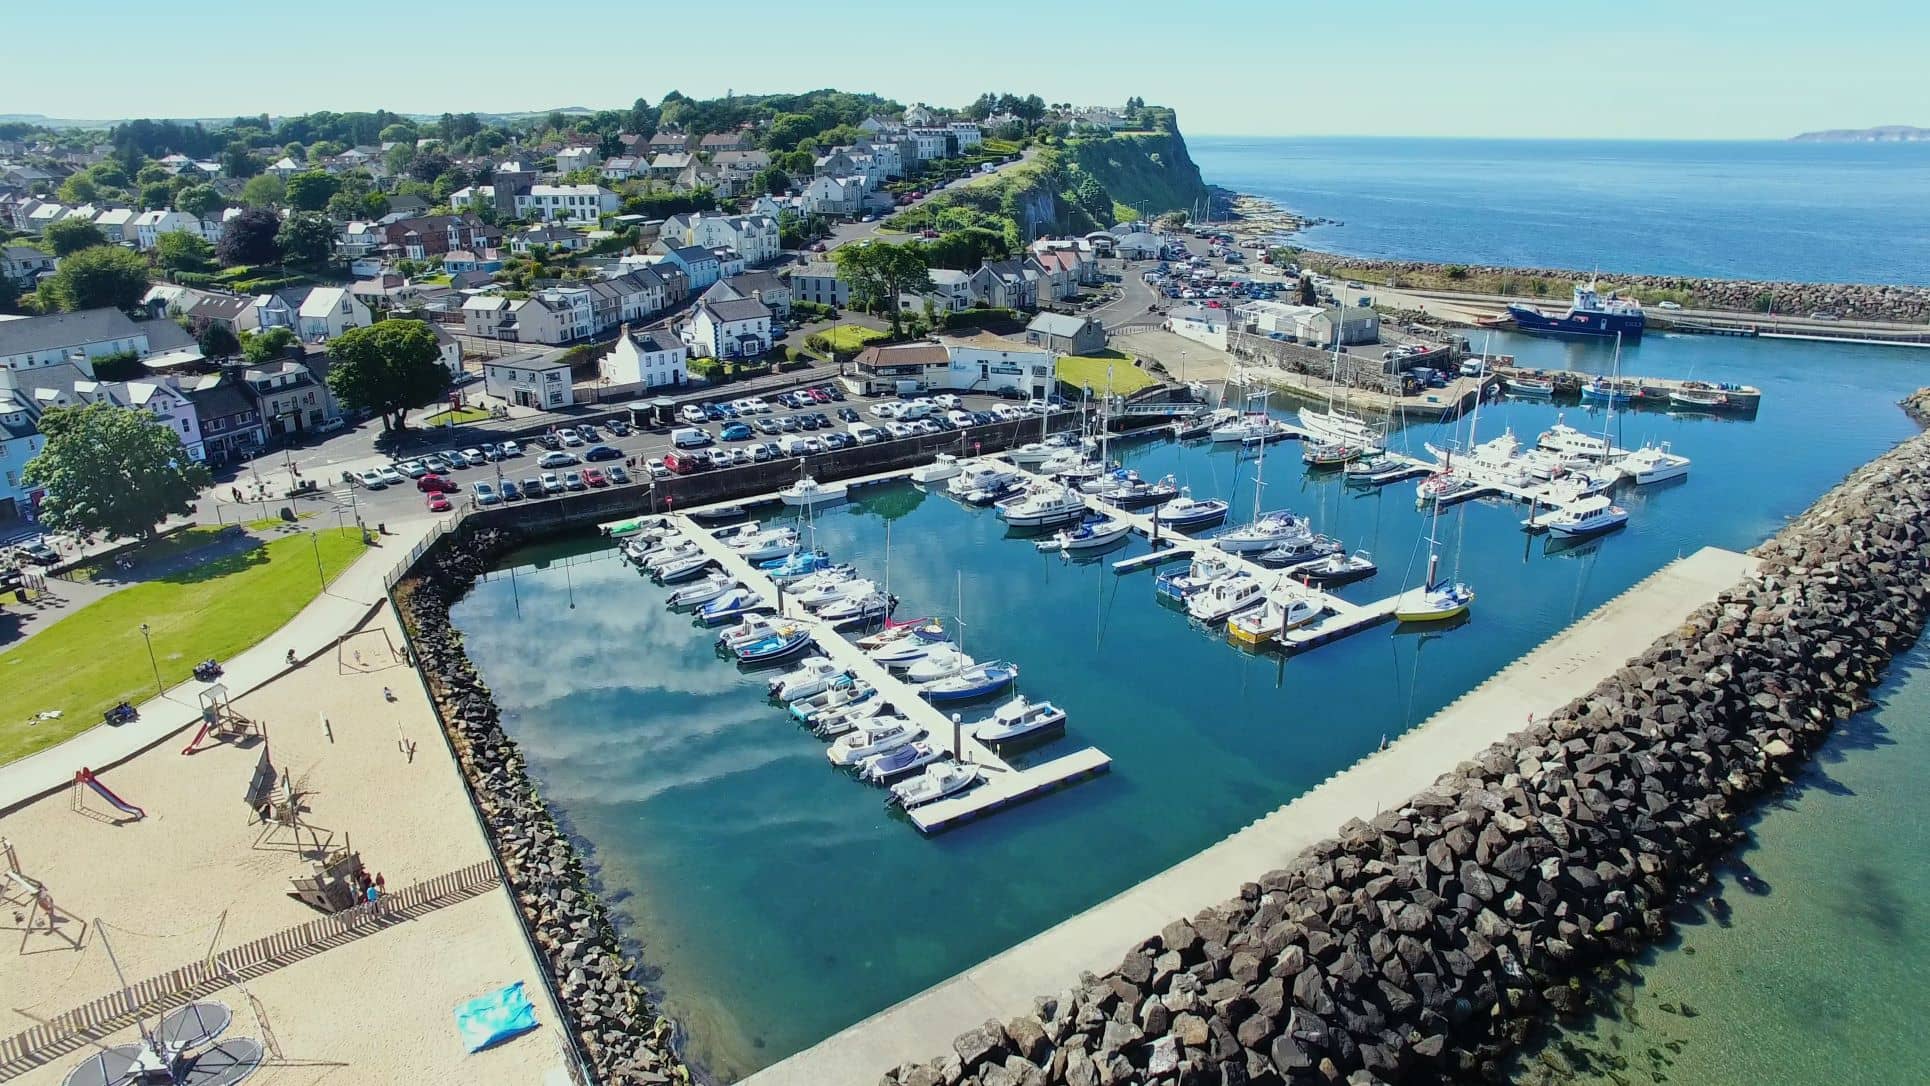 Ballycastle Marina from the air in the sun